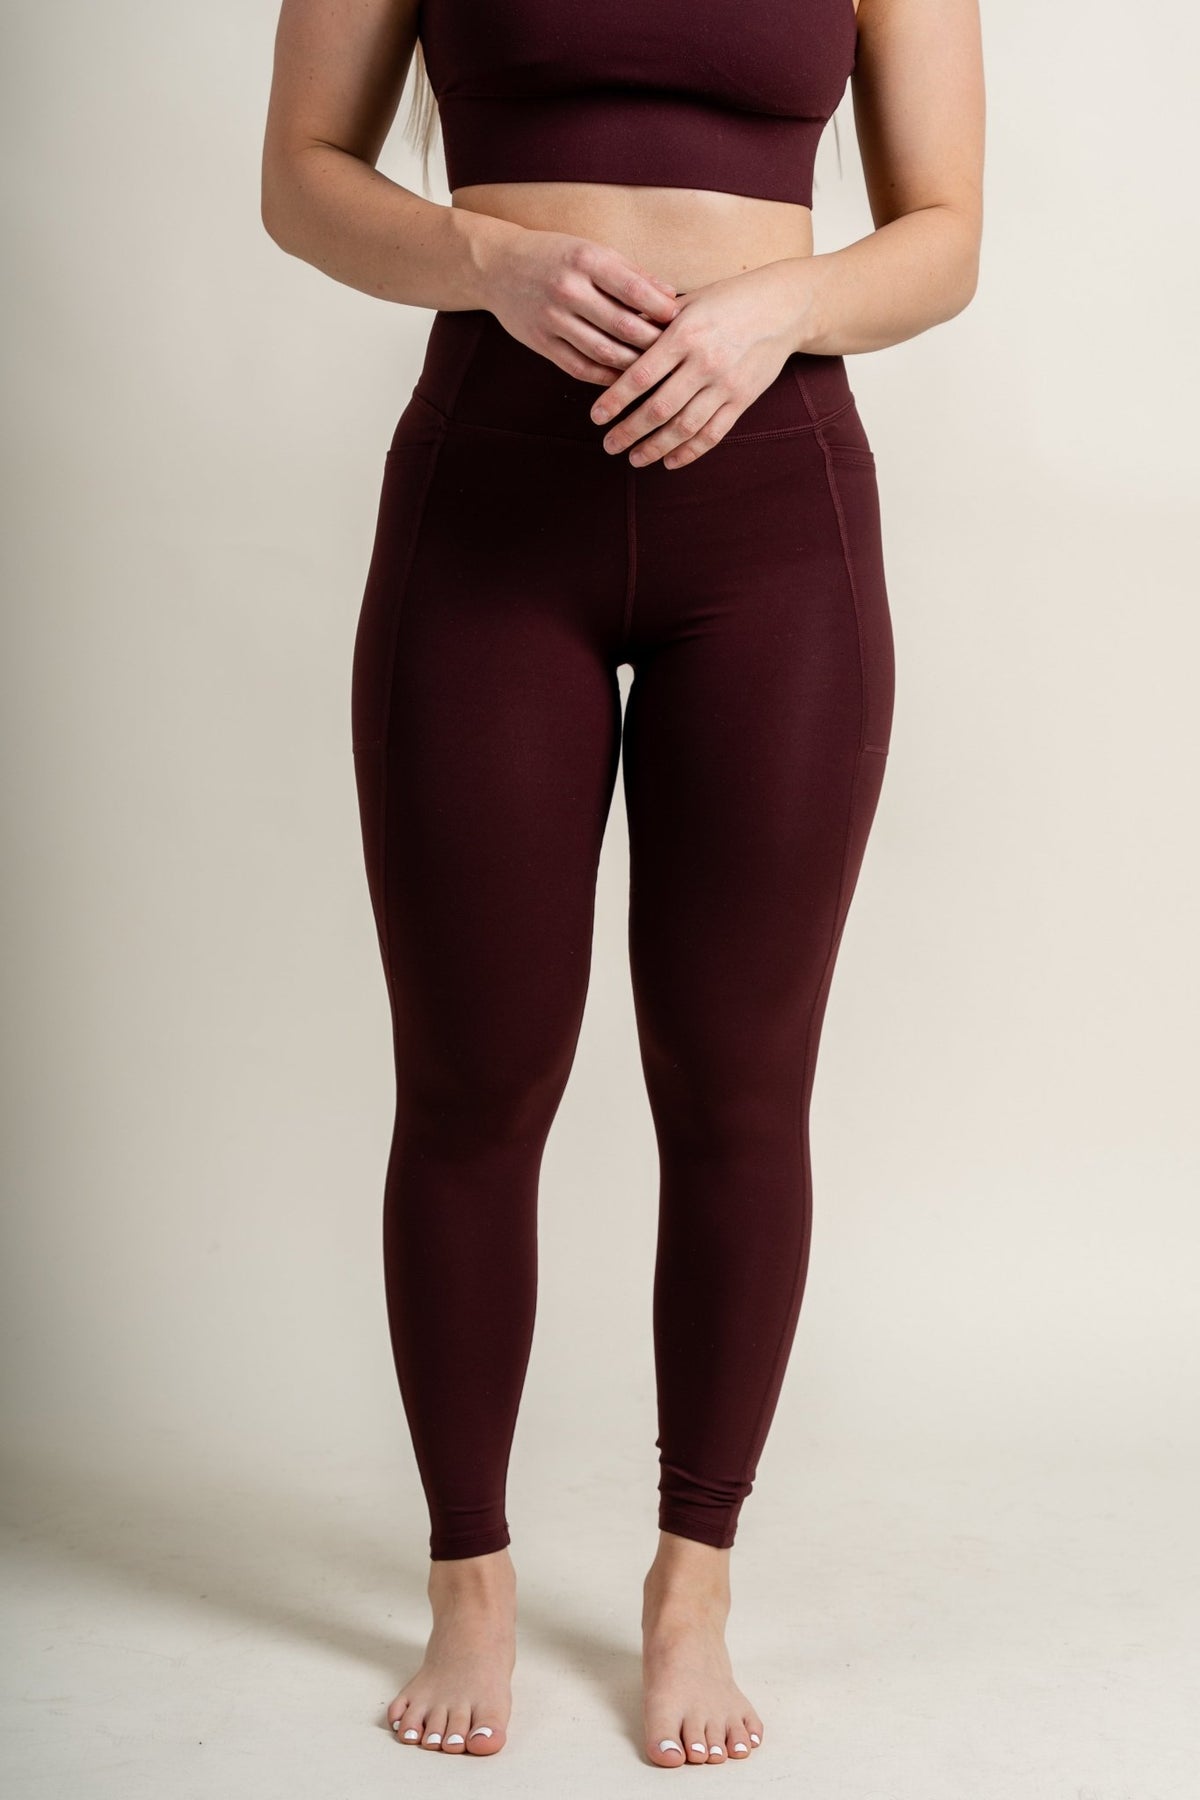 Z Supply all day leggings fig - Z Supply leggings - Z Supply Tops, Dresses, Tanks, Tees, Cardigans, Joggers and Loungewear at Lush Fashion Lounge